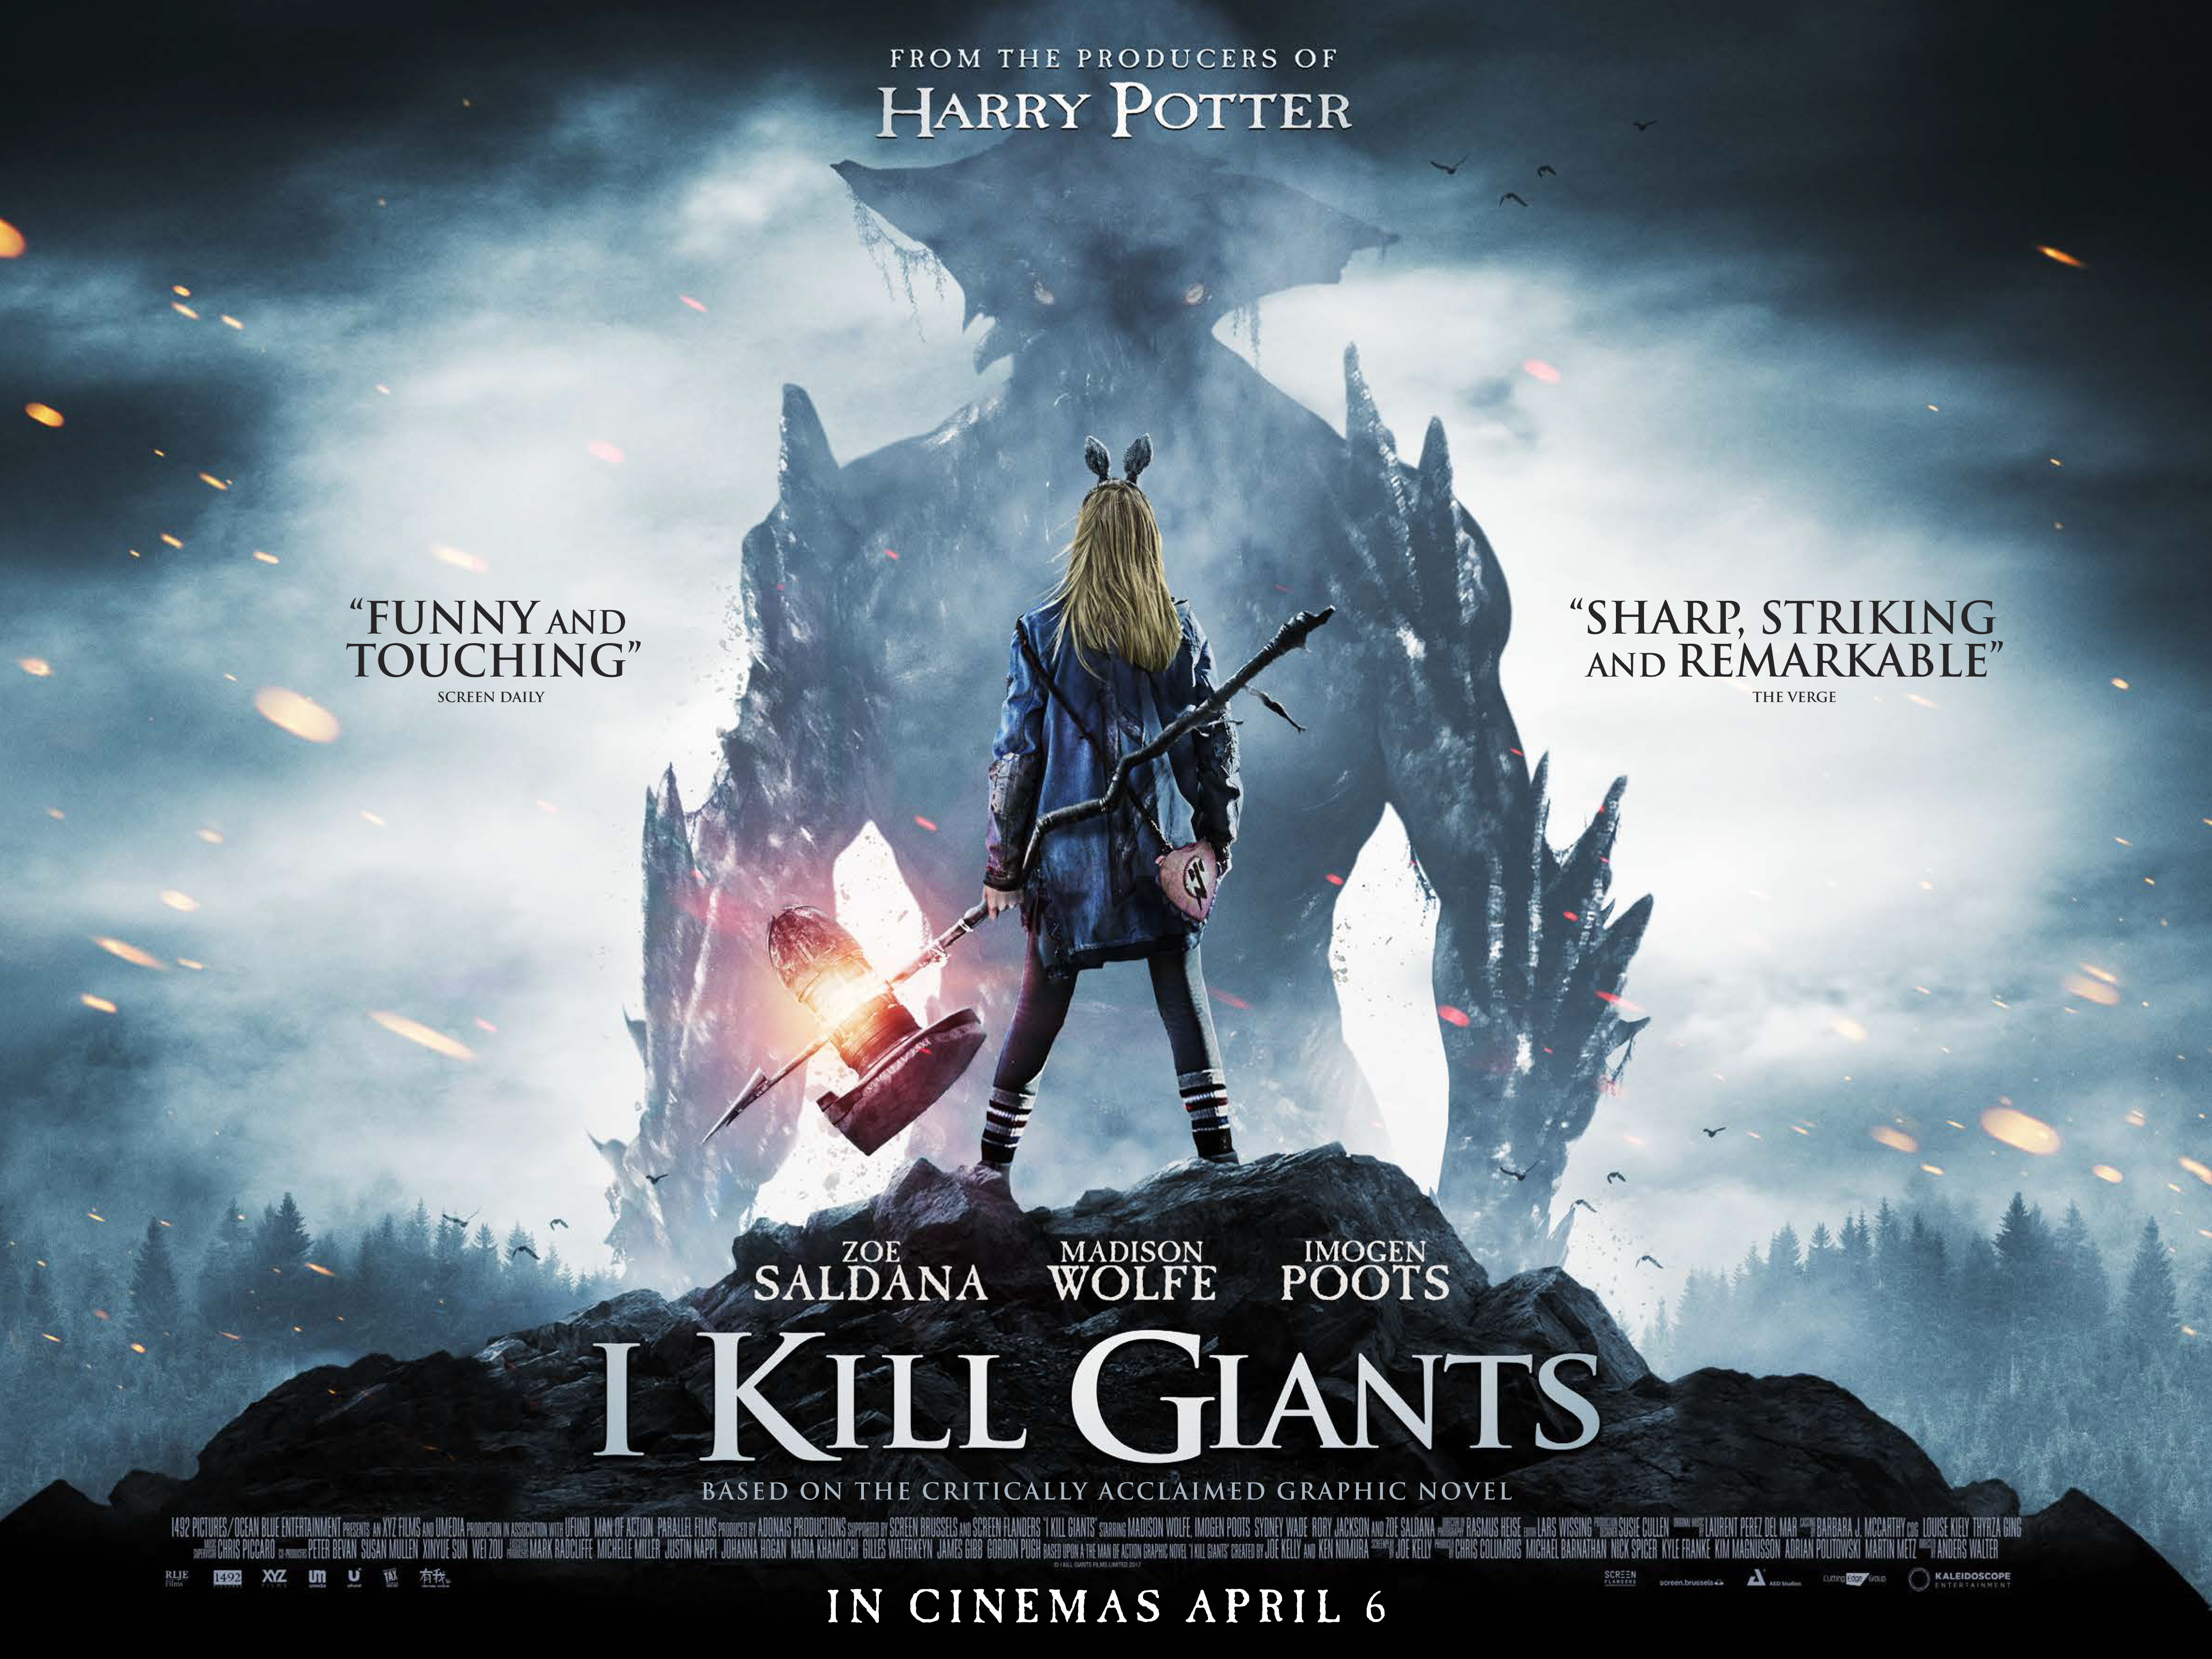 I KILL GIANTS MOVIE TIE-IN EDITION GRAPHIC NOVEL Paperback Collect 7 Part Series